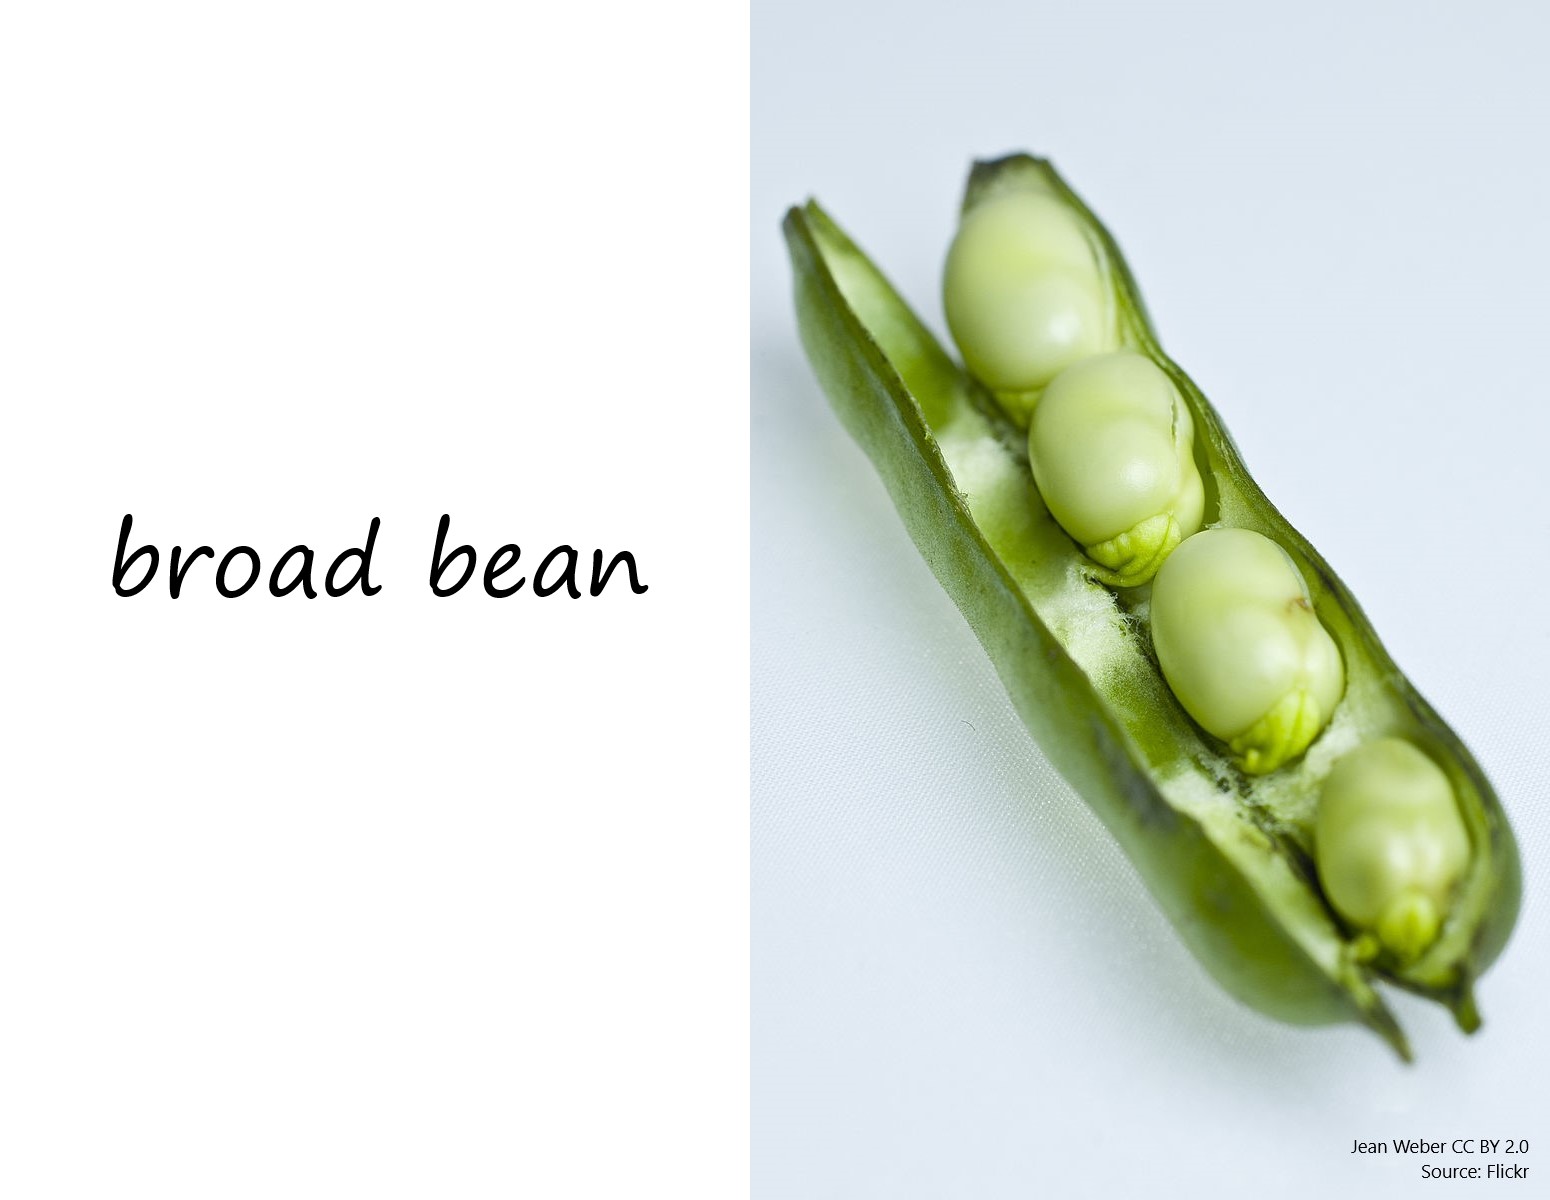 Broad bean photo labelled